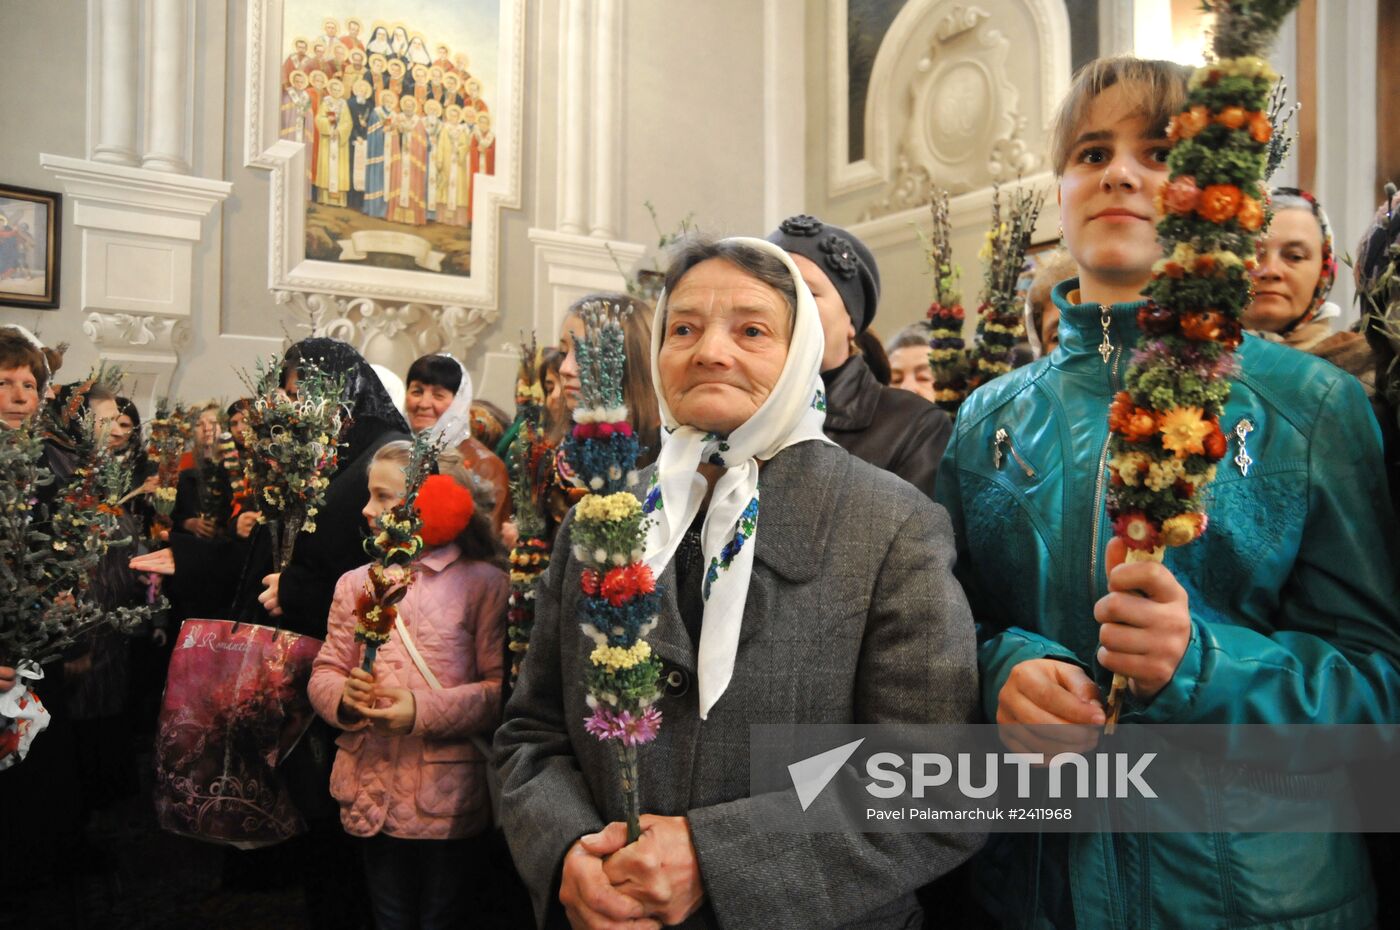 Pussy Willow Sunday celebrated in Lvov region